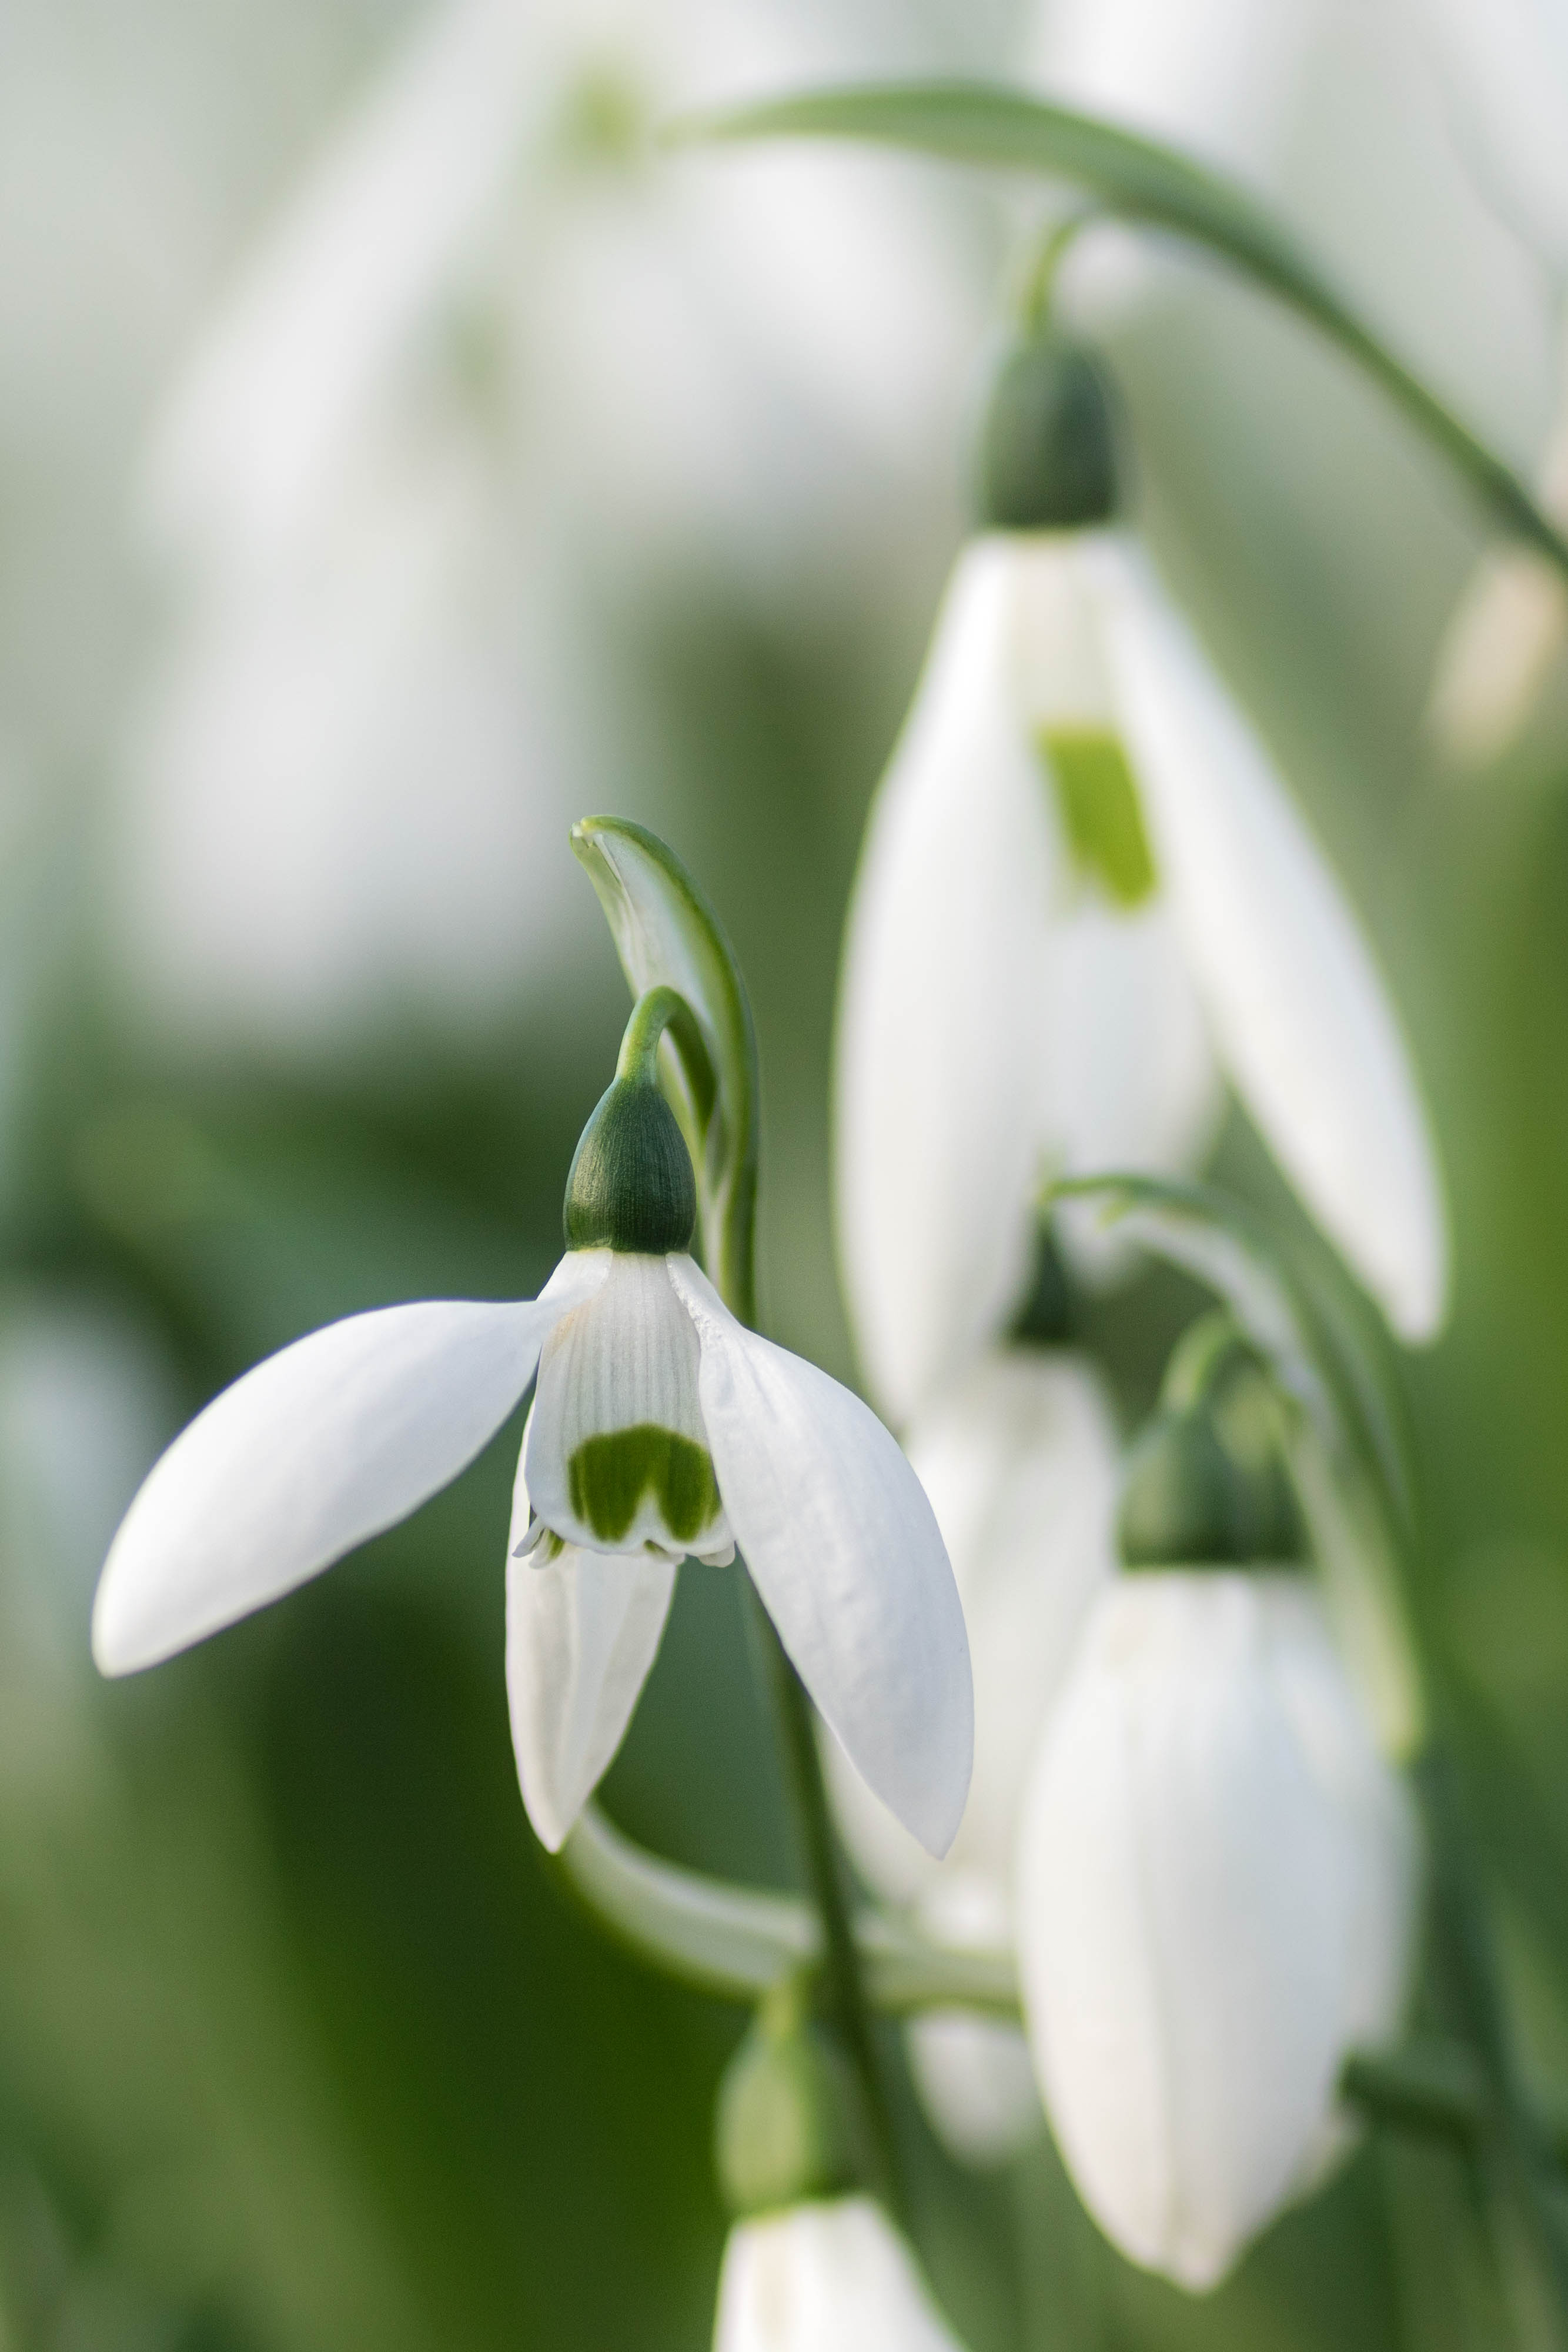 Newest Mobile Wallpaper Snowdrops